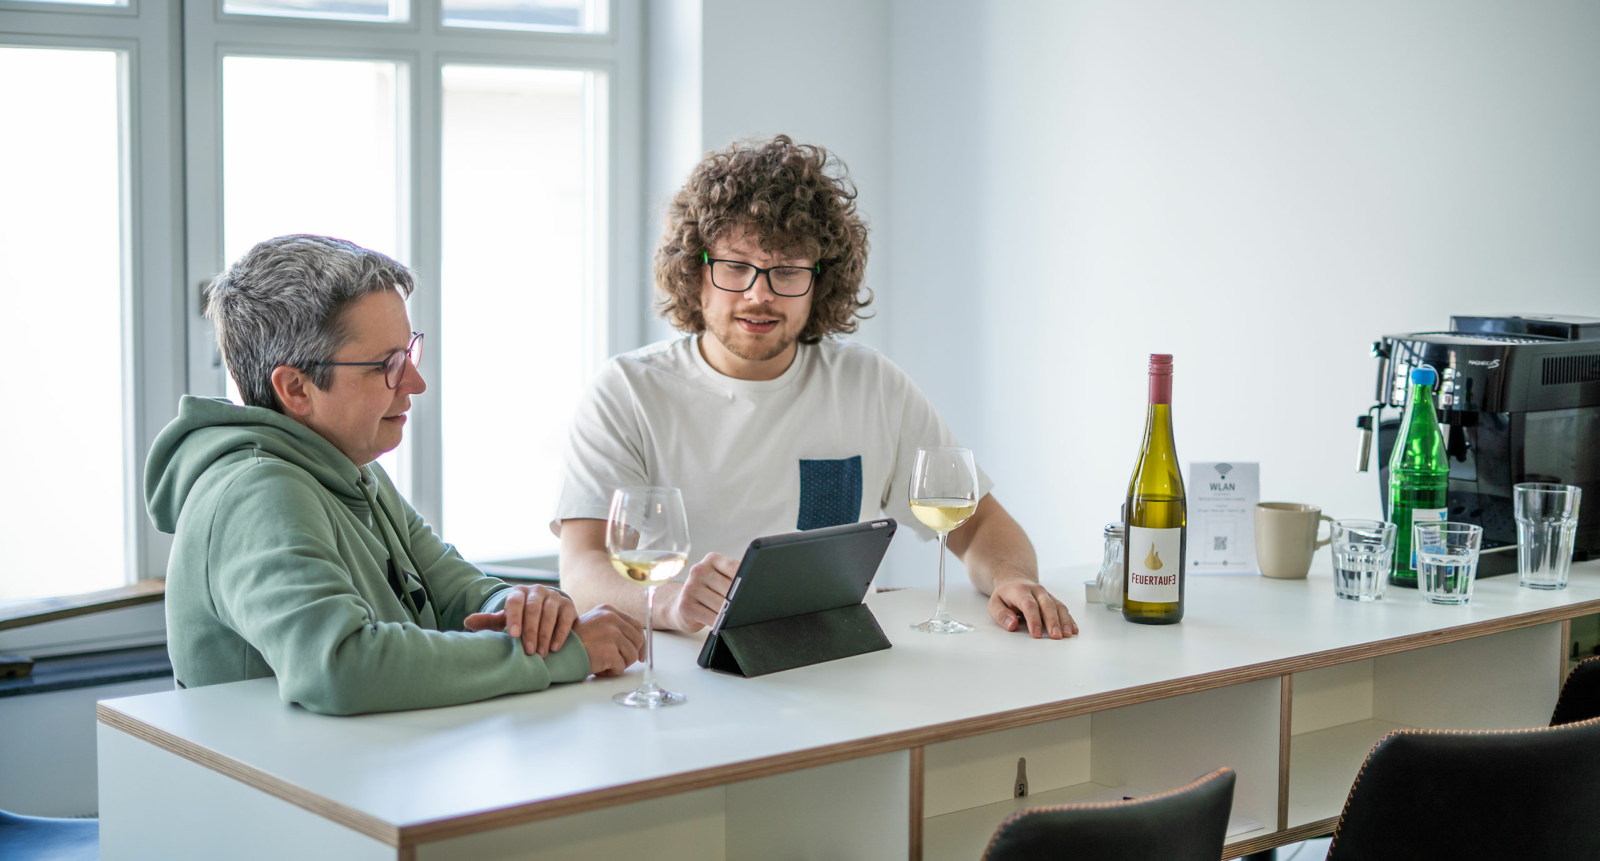 Faszination Mosel & LAG Mosel - Dein Coworking Space an der Mosel finden!